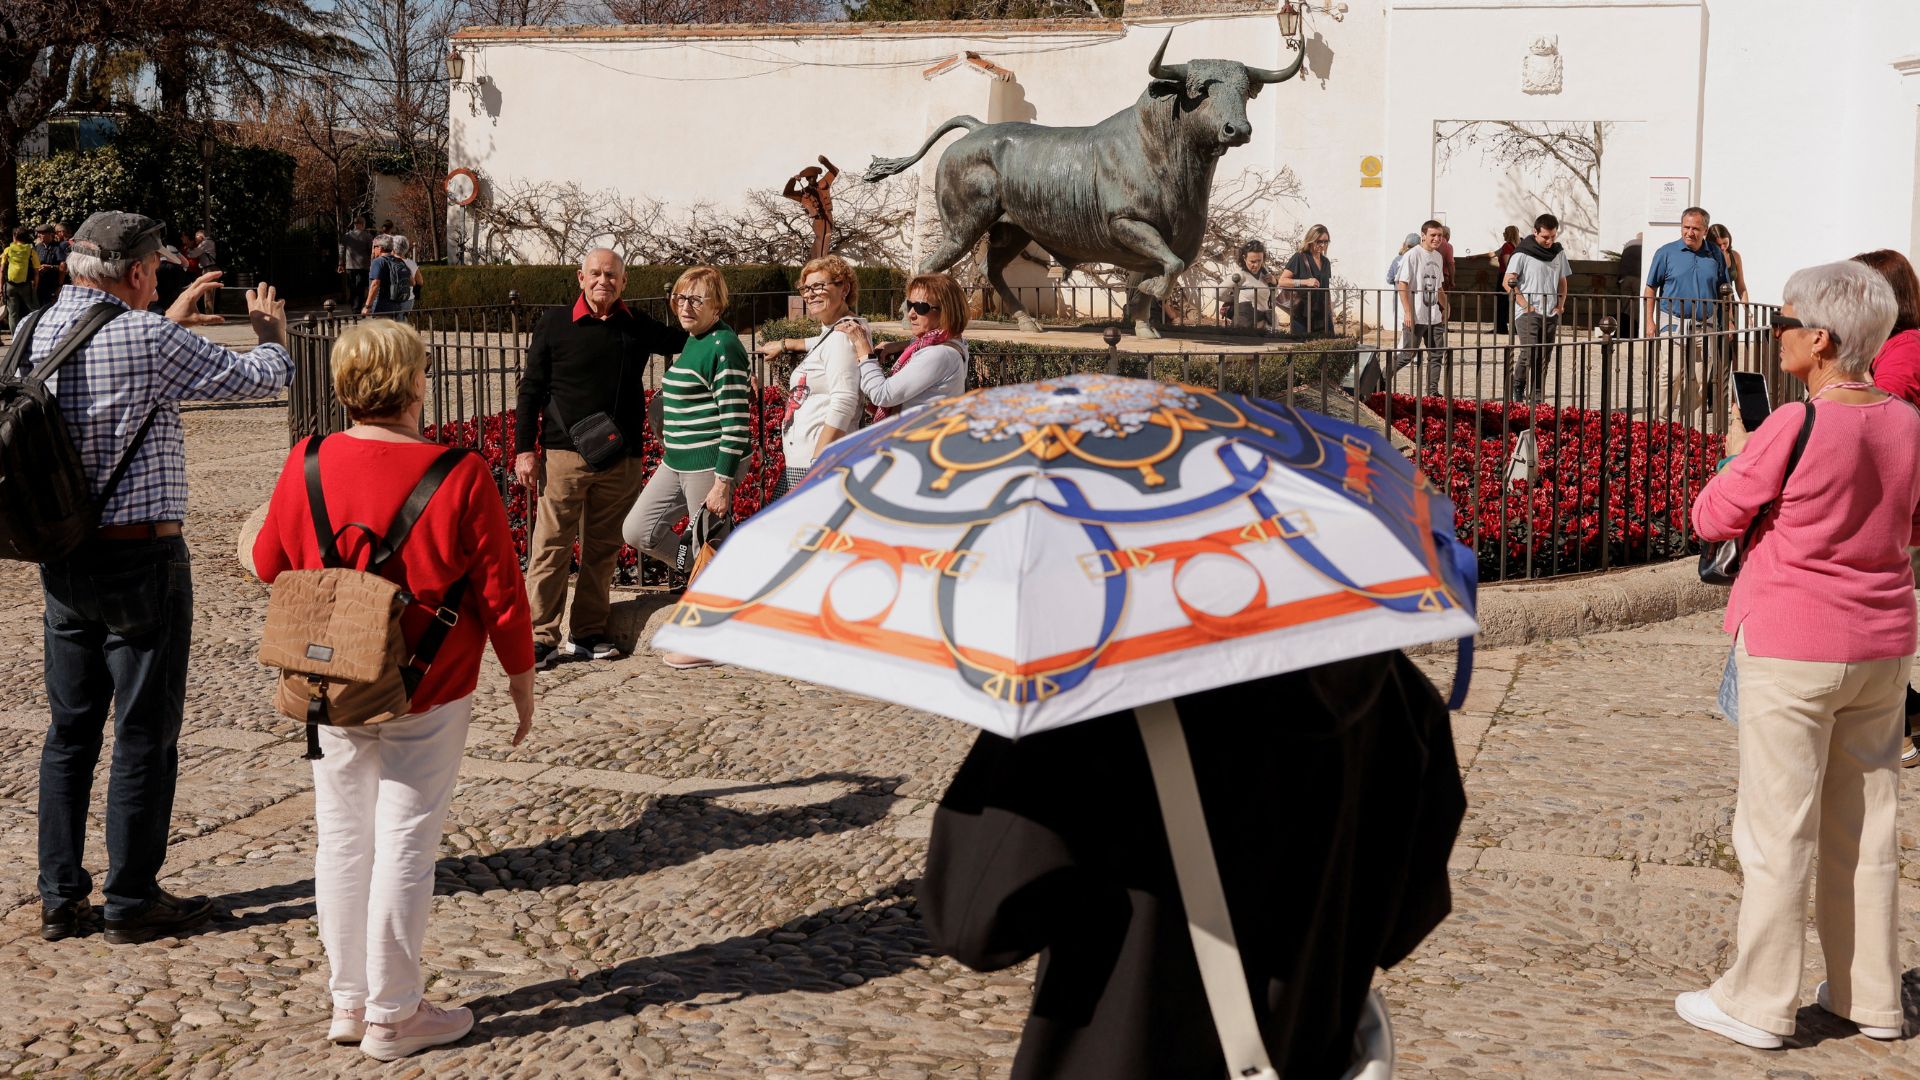 A tourist uses an umbrella to cover herself from the sun in Ronda, Spain on February 13. /Jon Nazca/Reuters